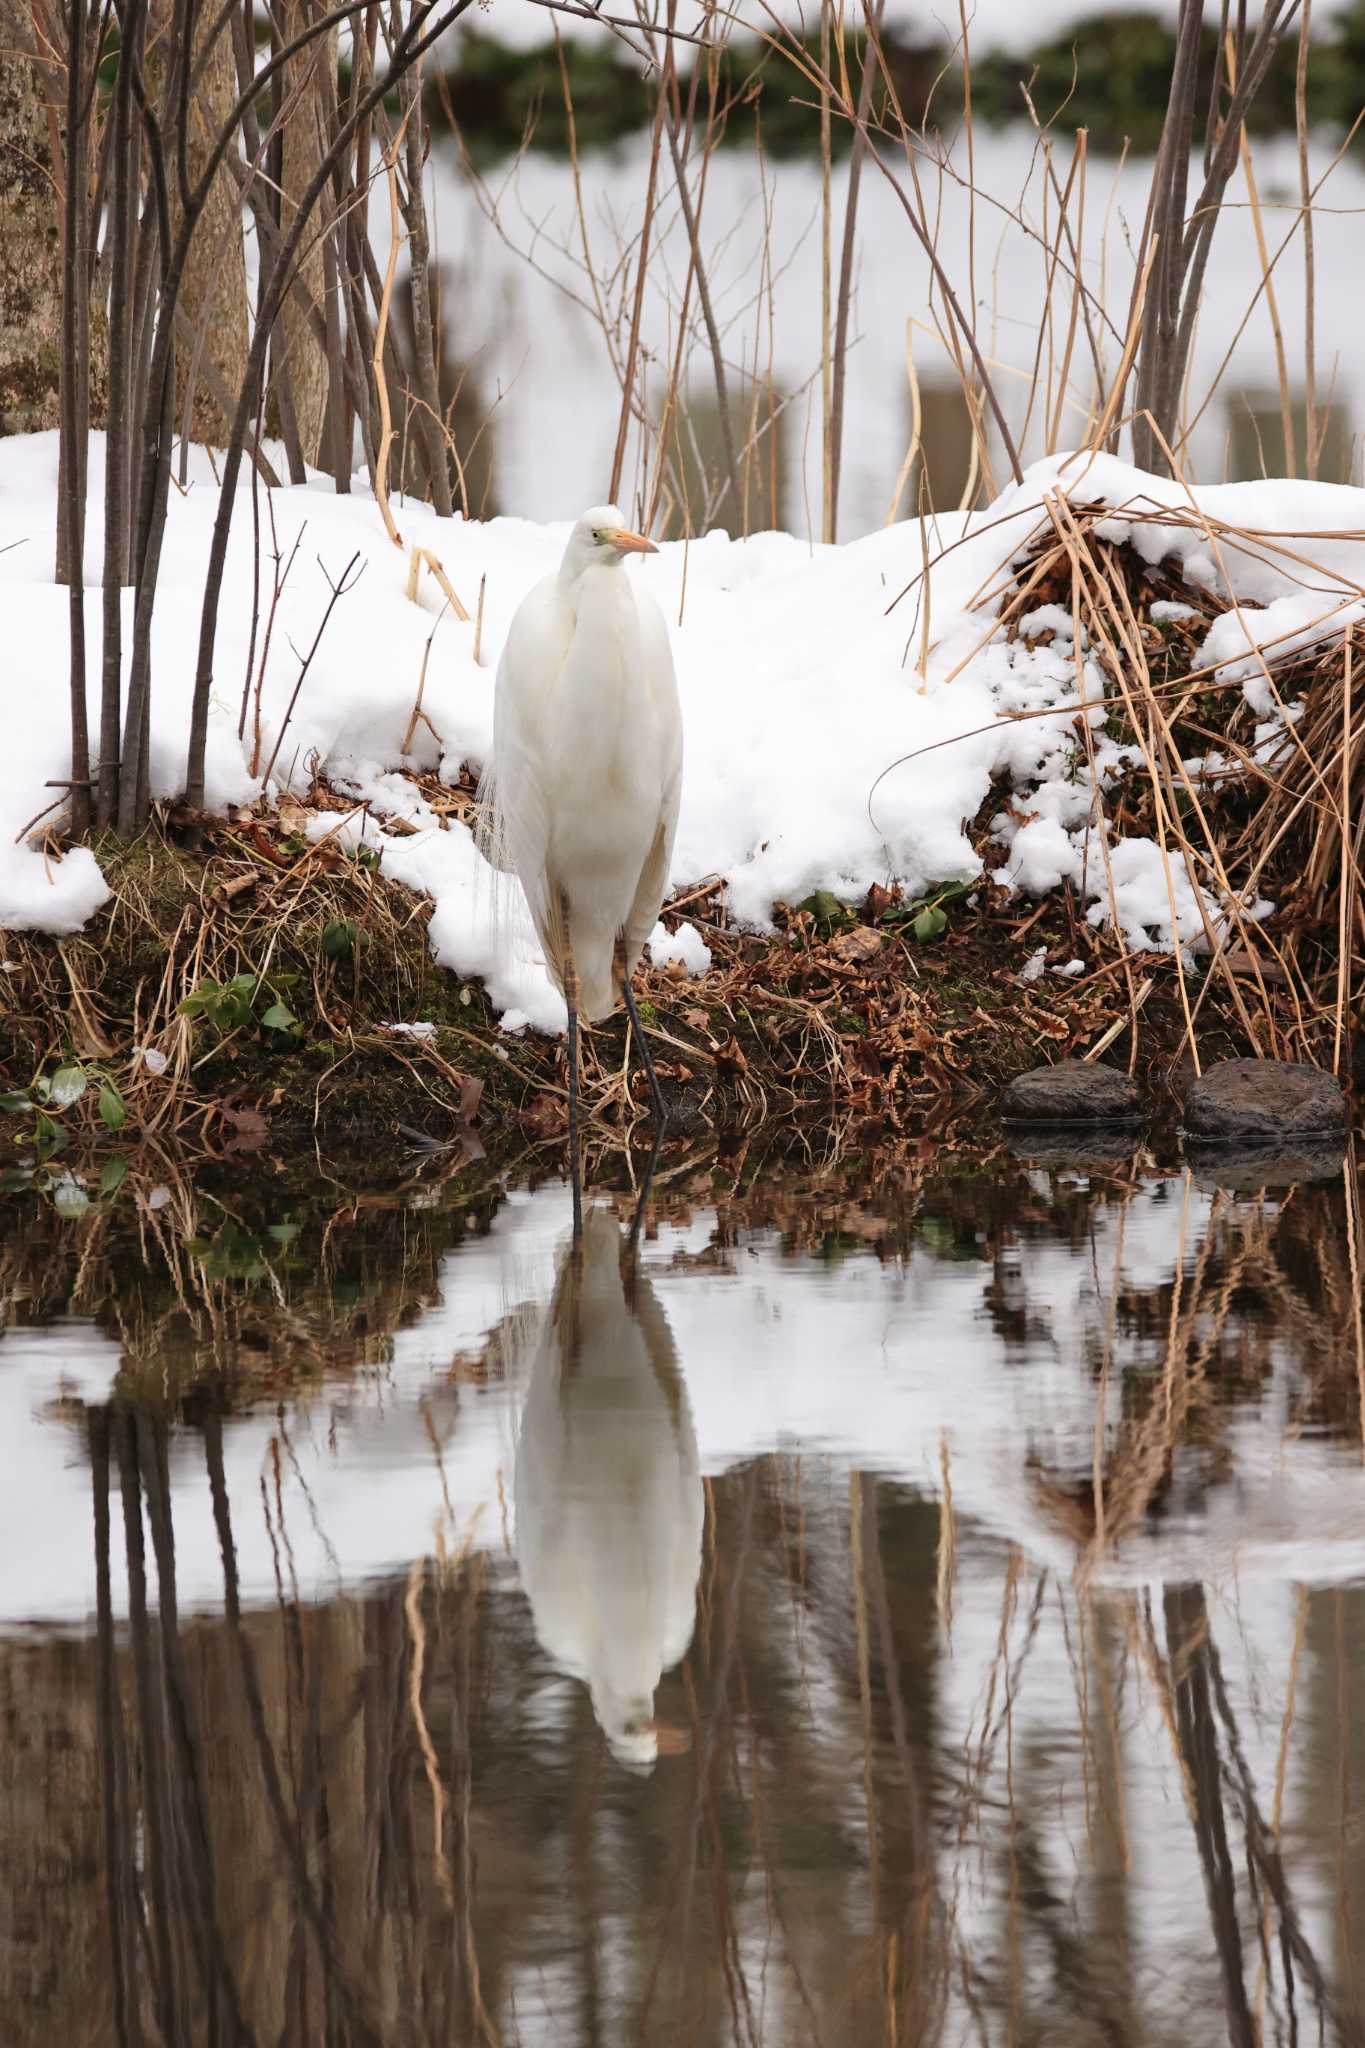 Photo of Great Egret at Tomakomai Experimental Forest by かちこ